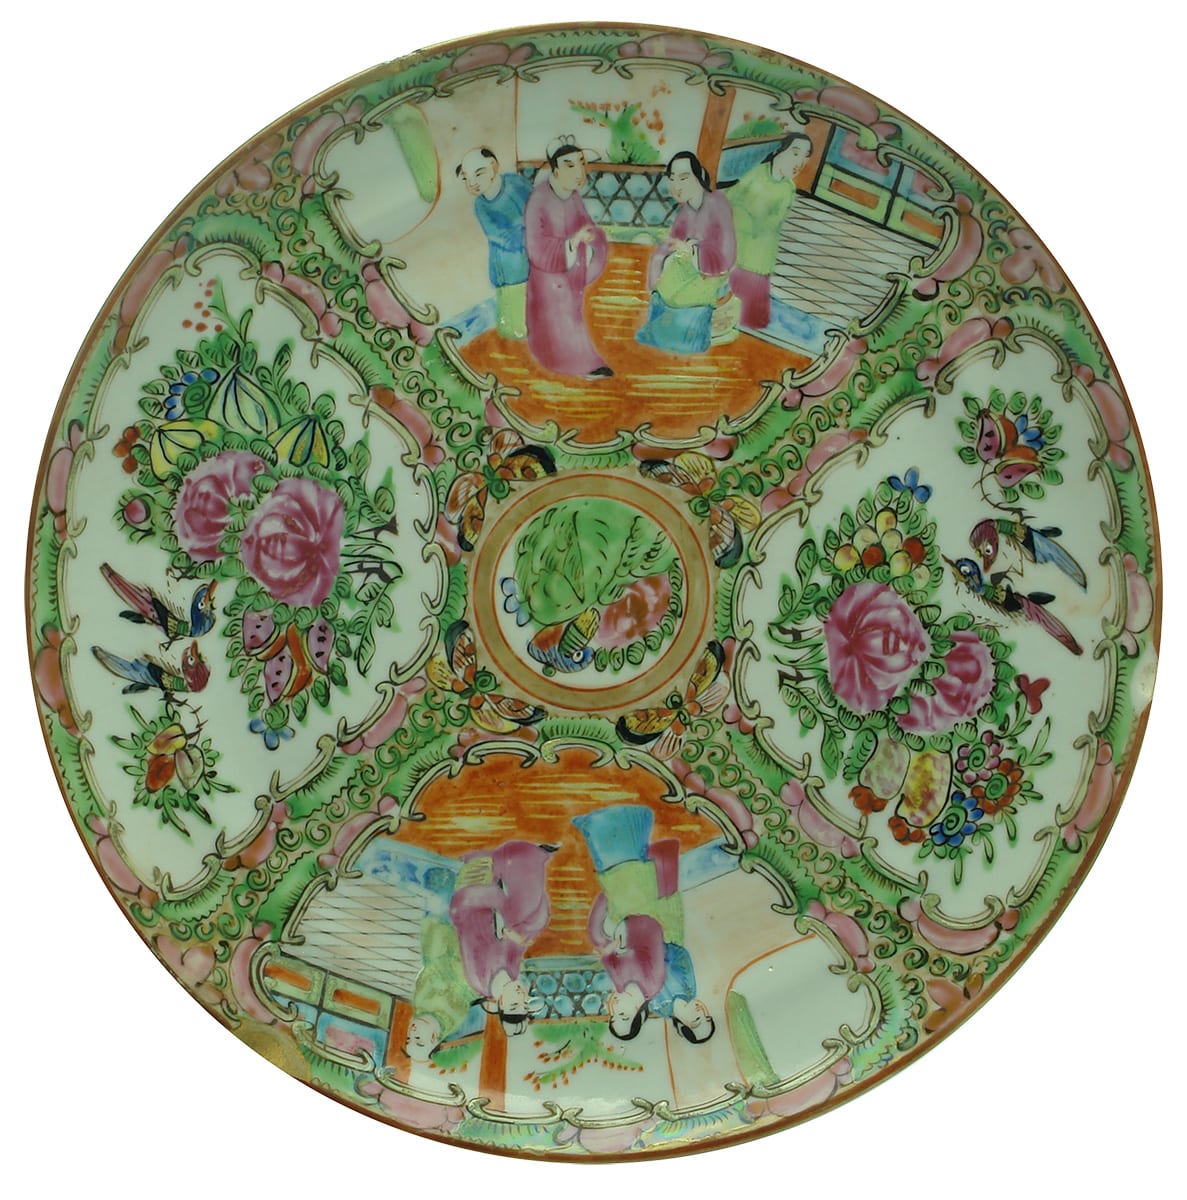 Chinese enamelled ceramic plate